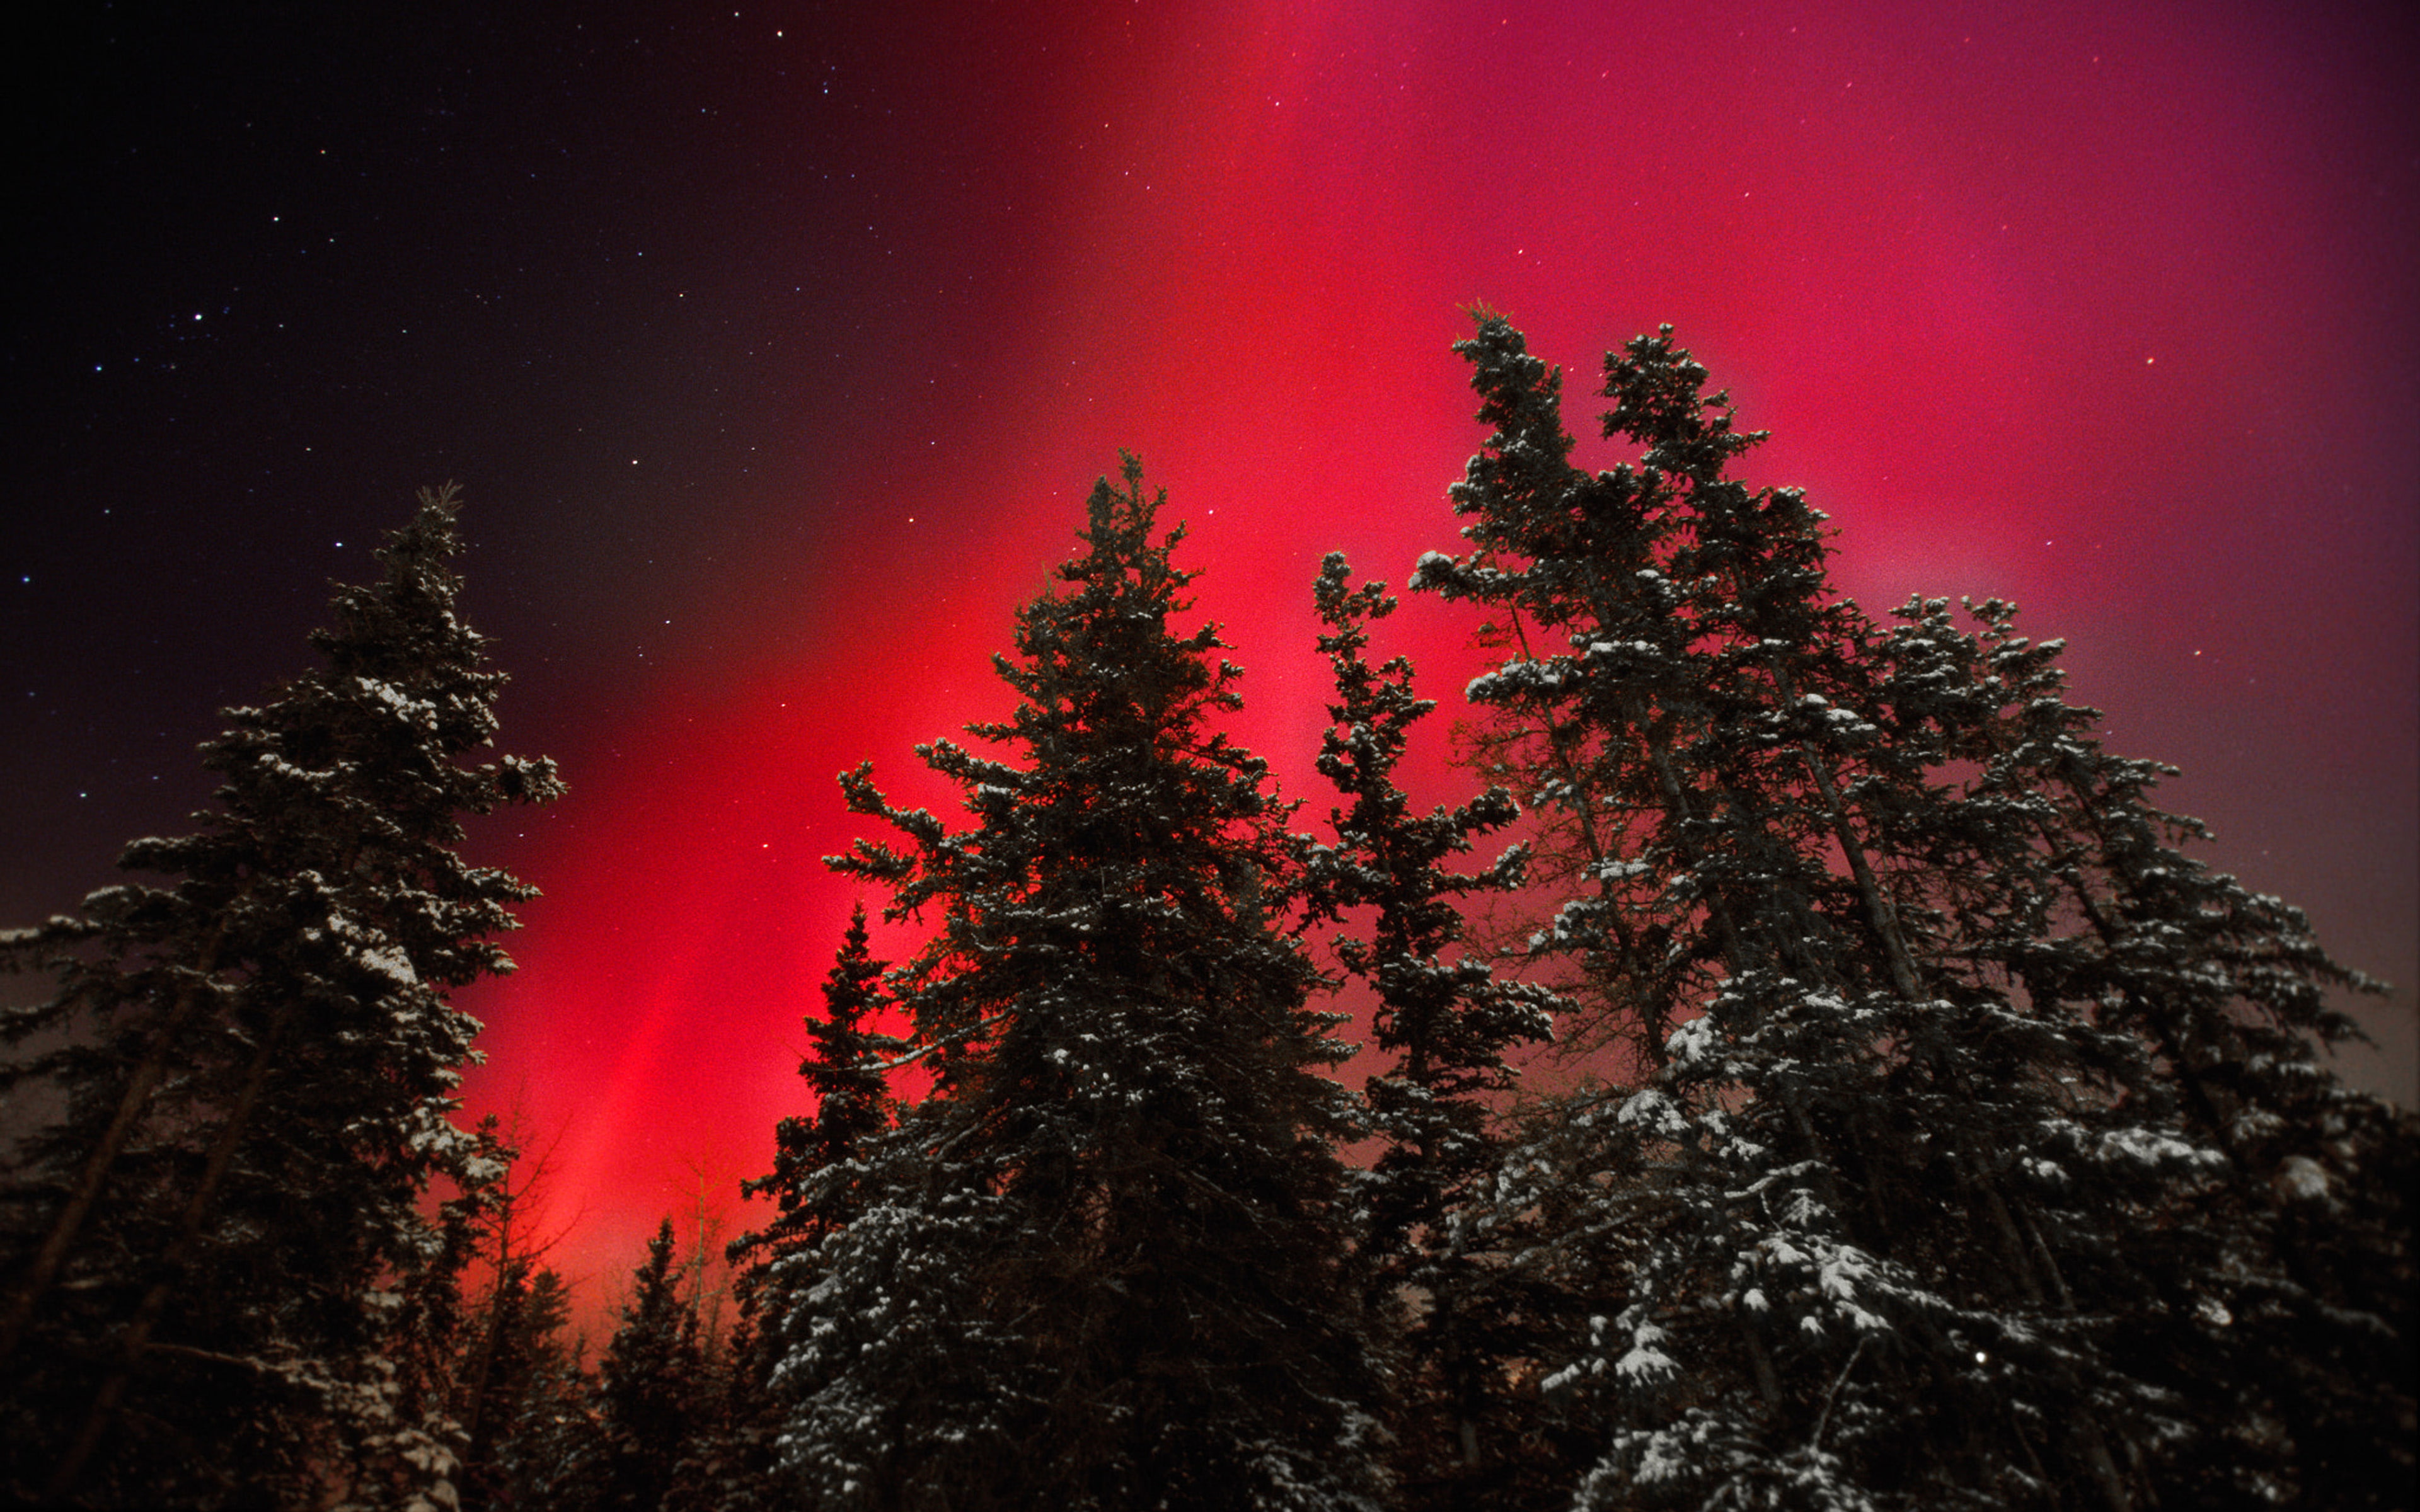 Fiery Sky Red Aurora Special Night Rare Occurrence In Yukon Canadian Territory 4k Ultra Hd Desktop Wallpapers For Computers Laptop Tablet And Mobile Phones